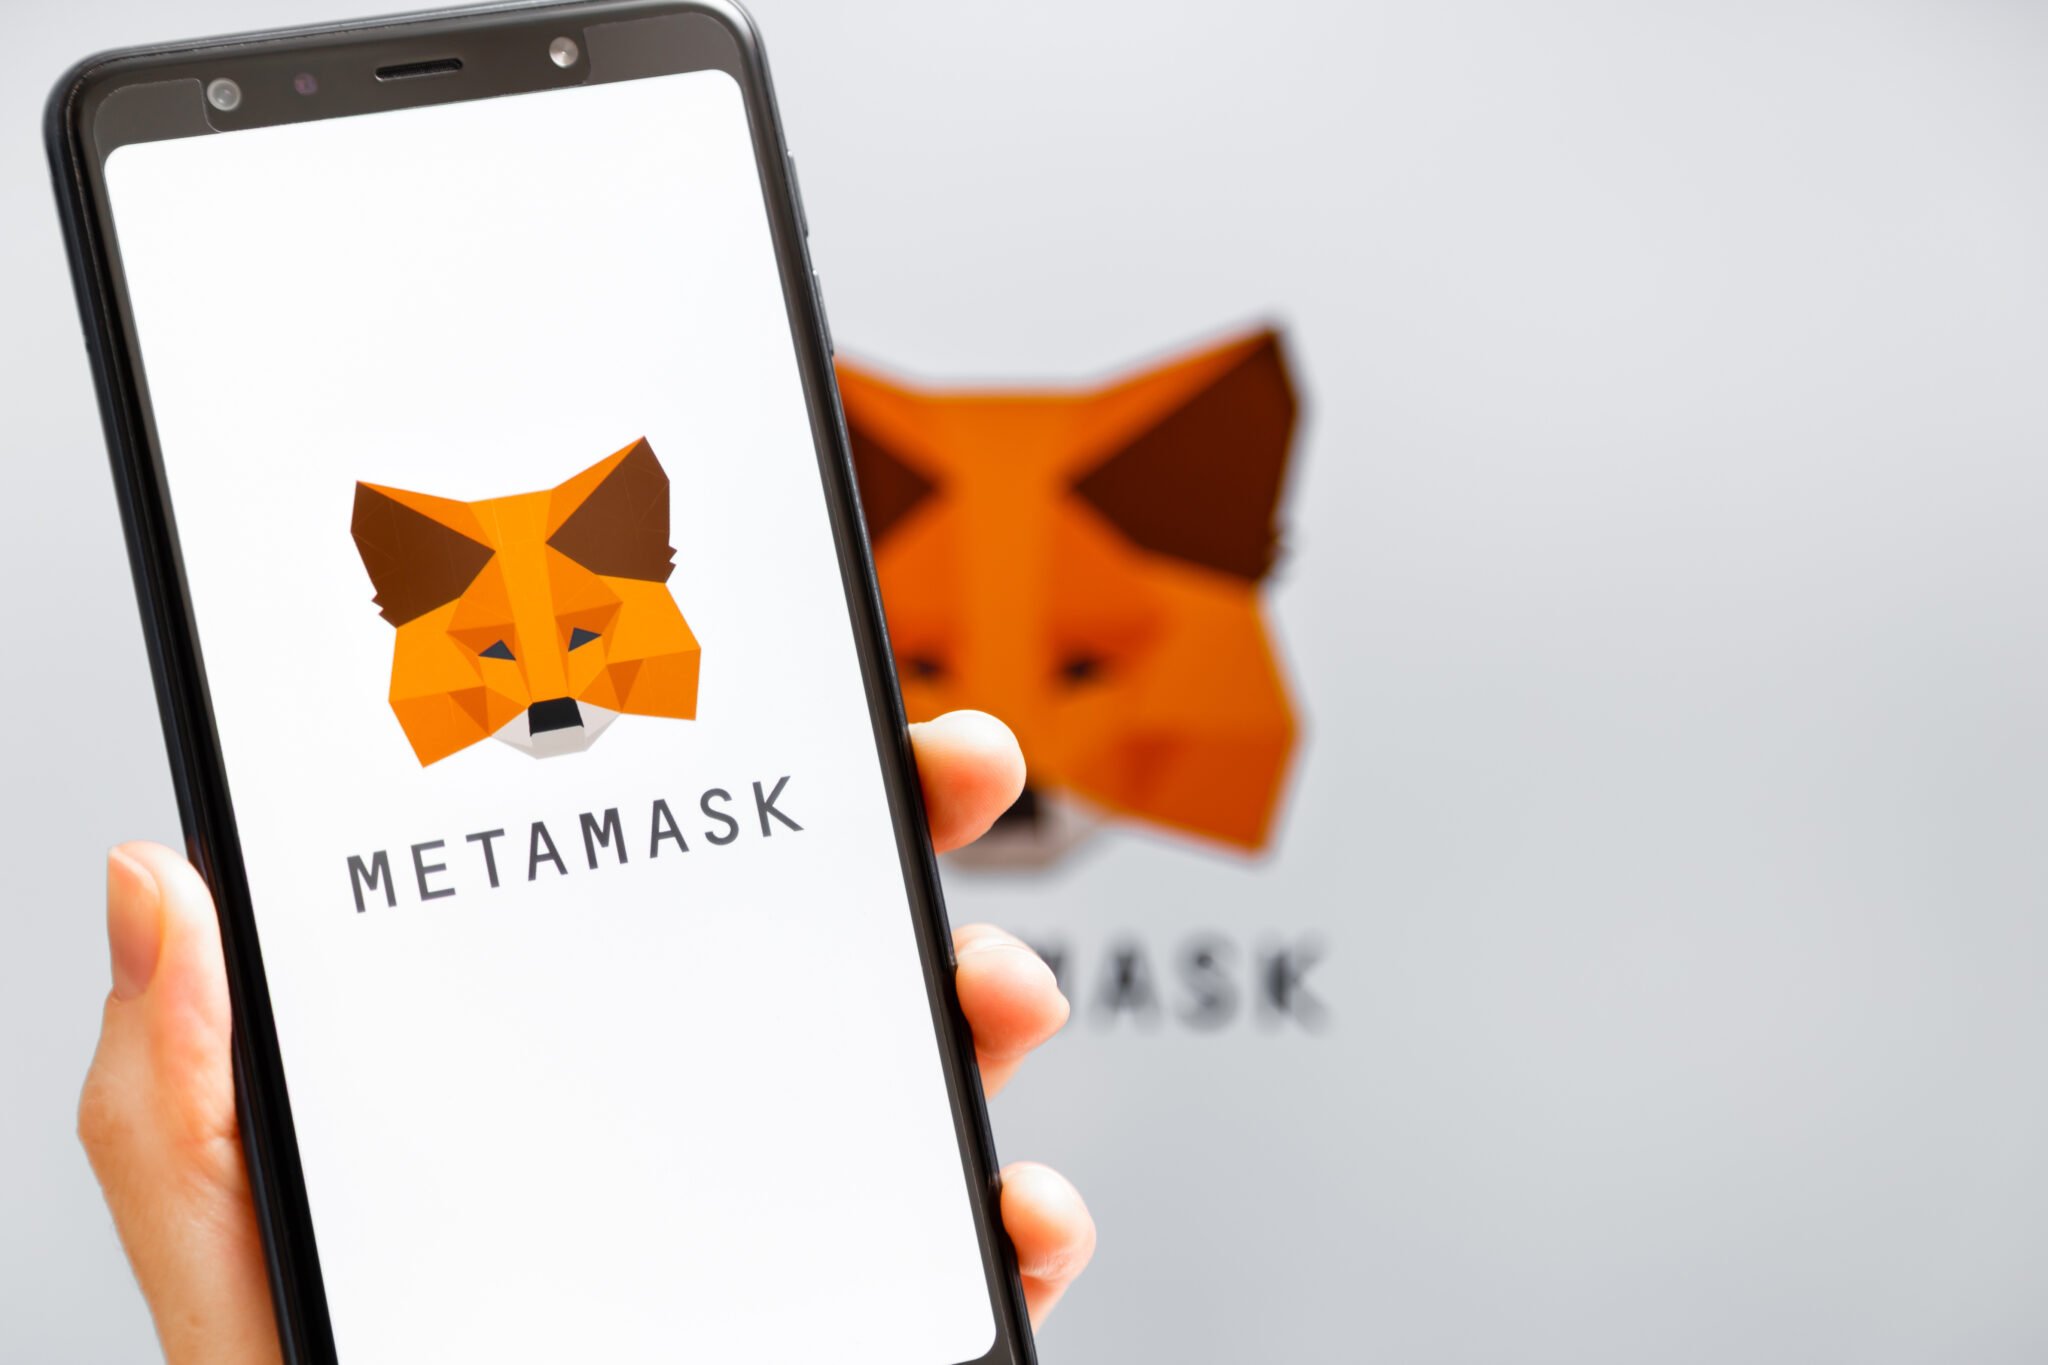 Ukraine, Odessa - October, 9 2021: Hand holding mobile with MetaMask app running at smartphone screen with MetaMask logo at background. MetaMask is software crypto wallet